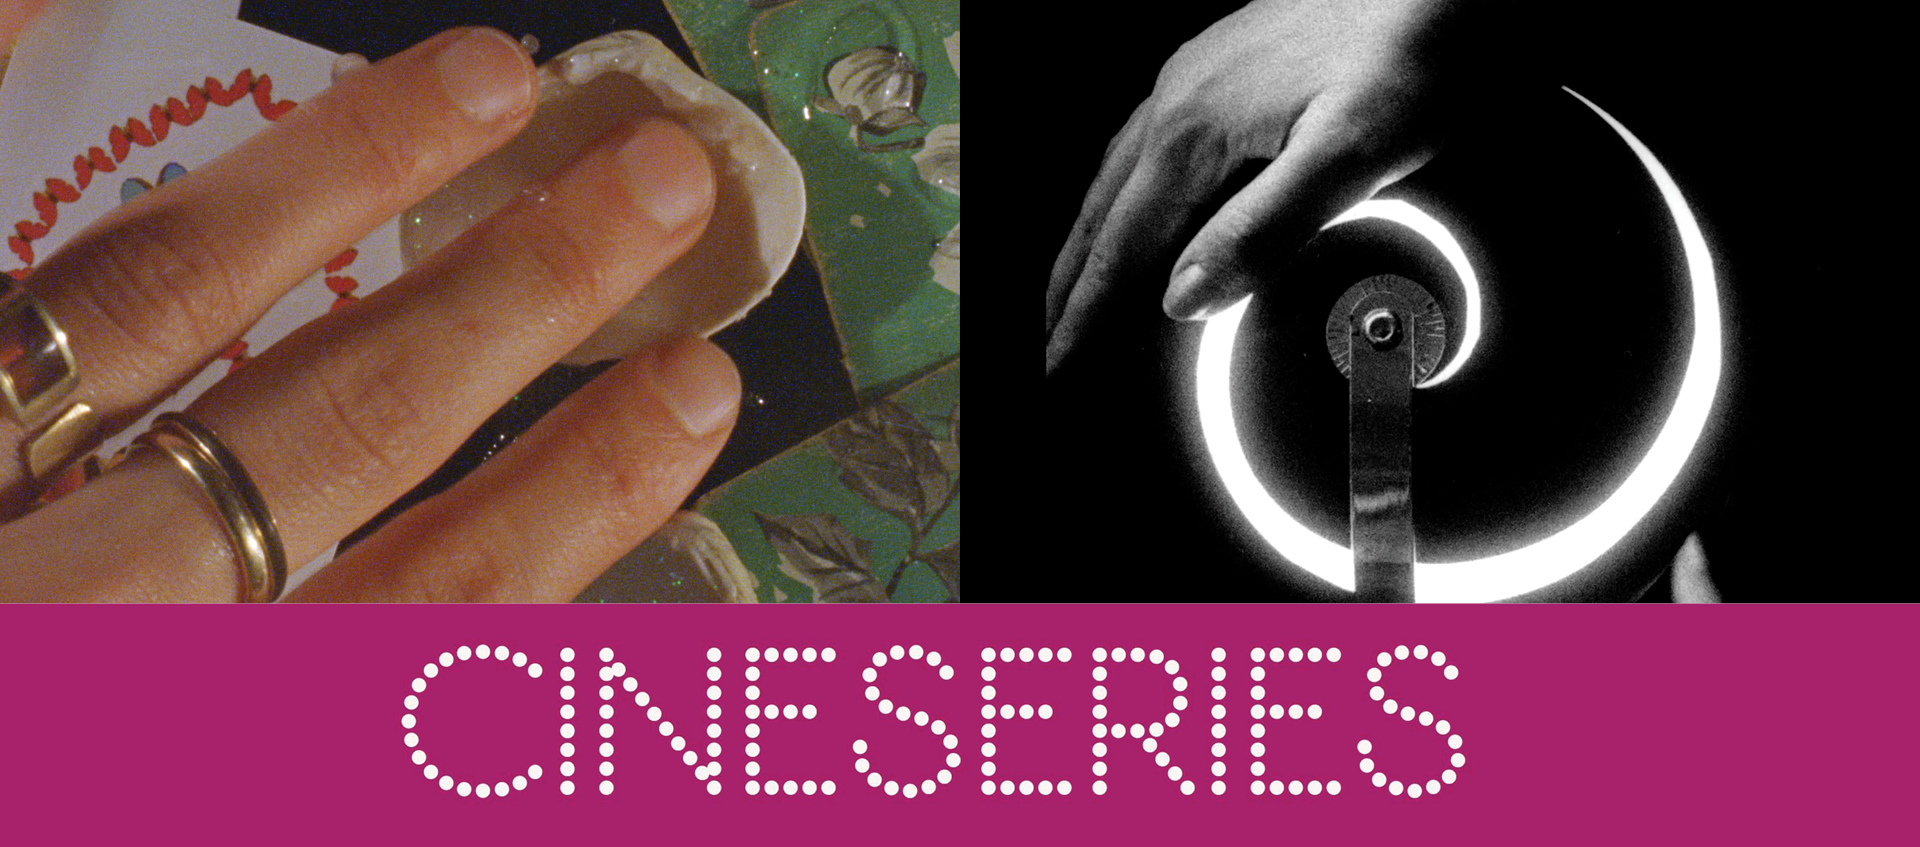 Cineseries logo in white text over a pink background below two film stills